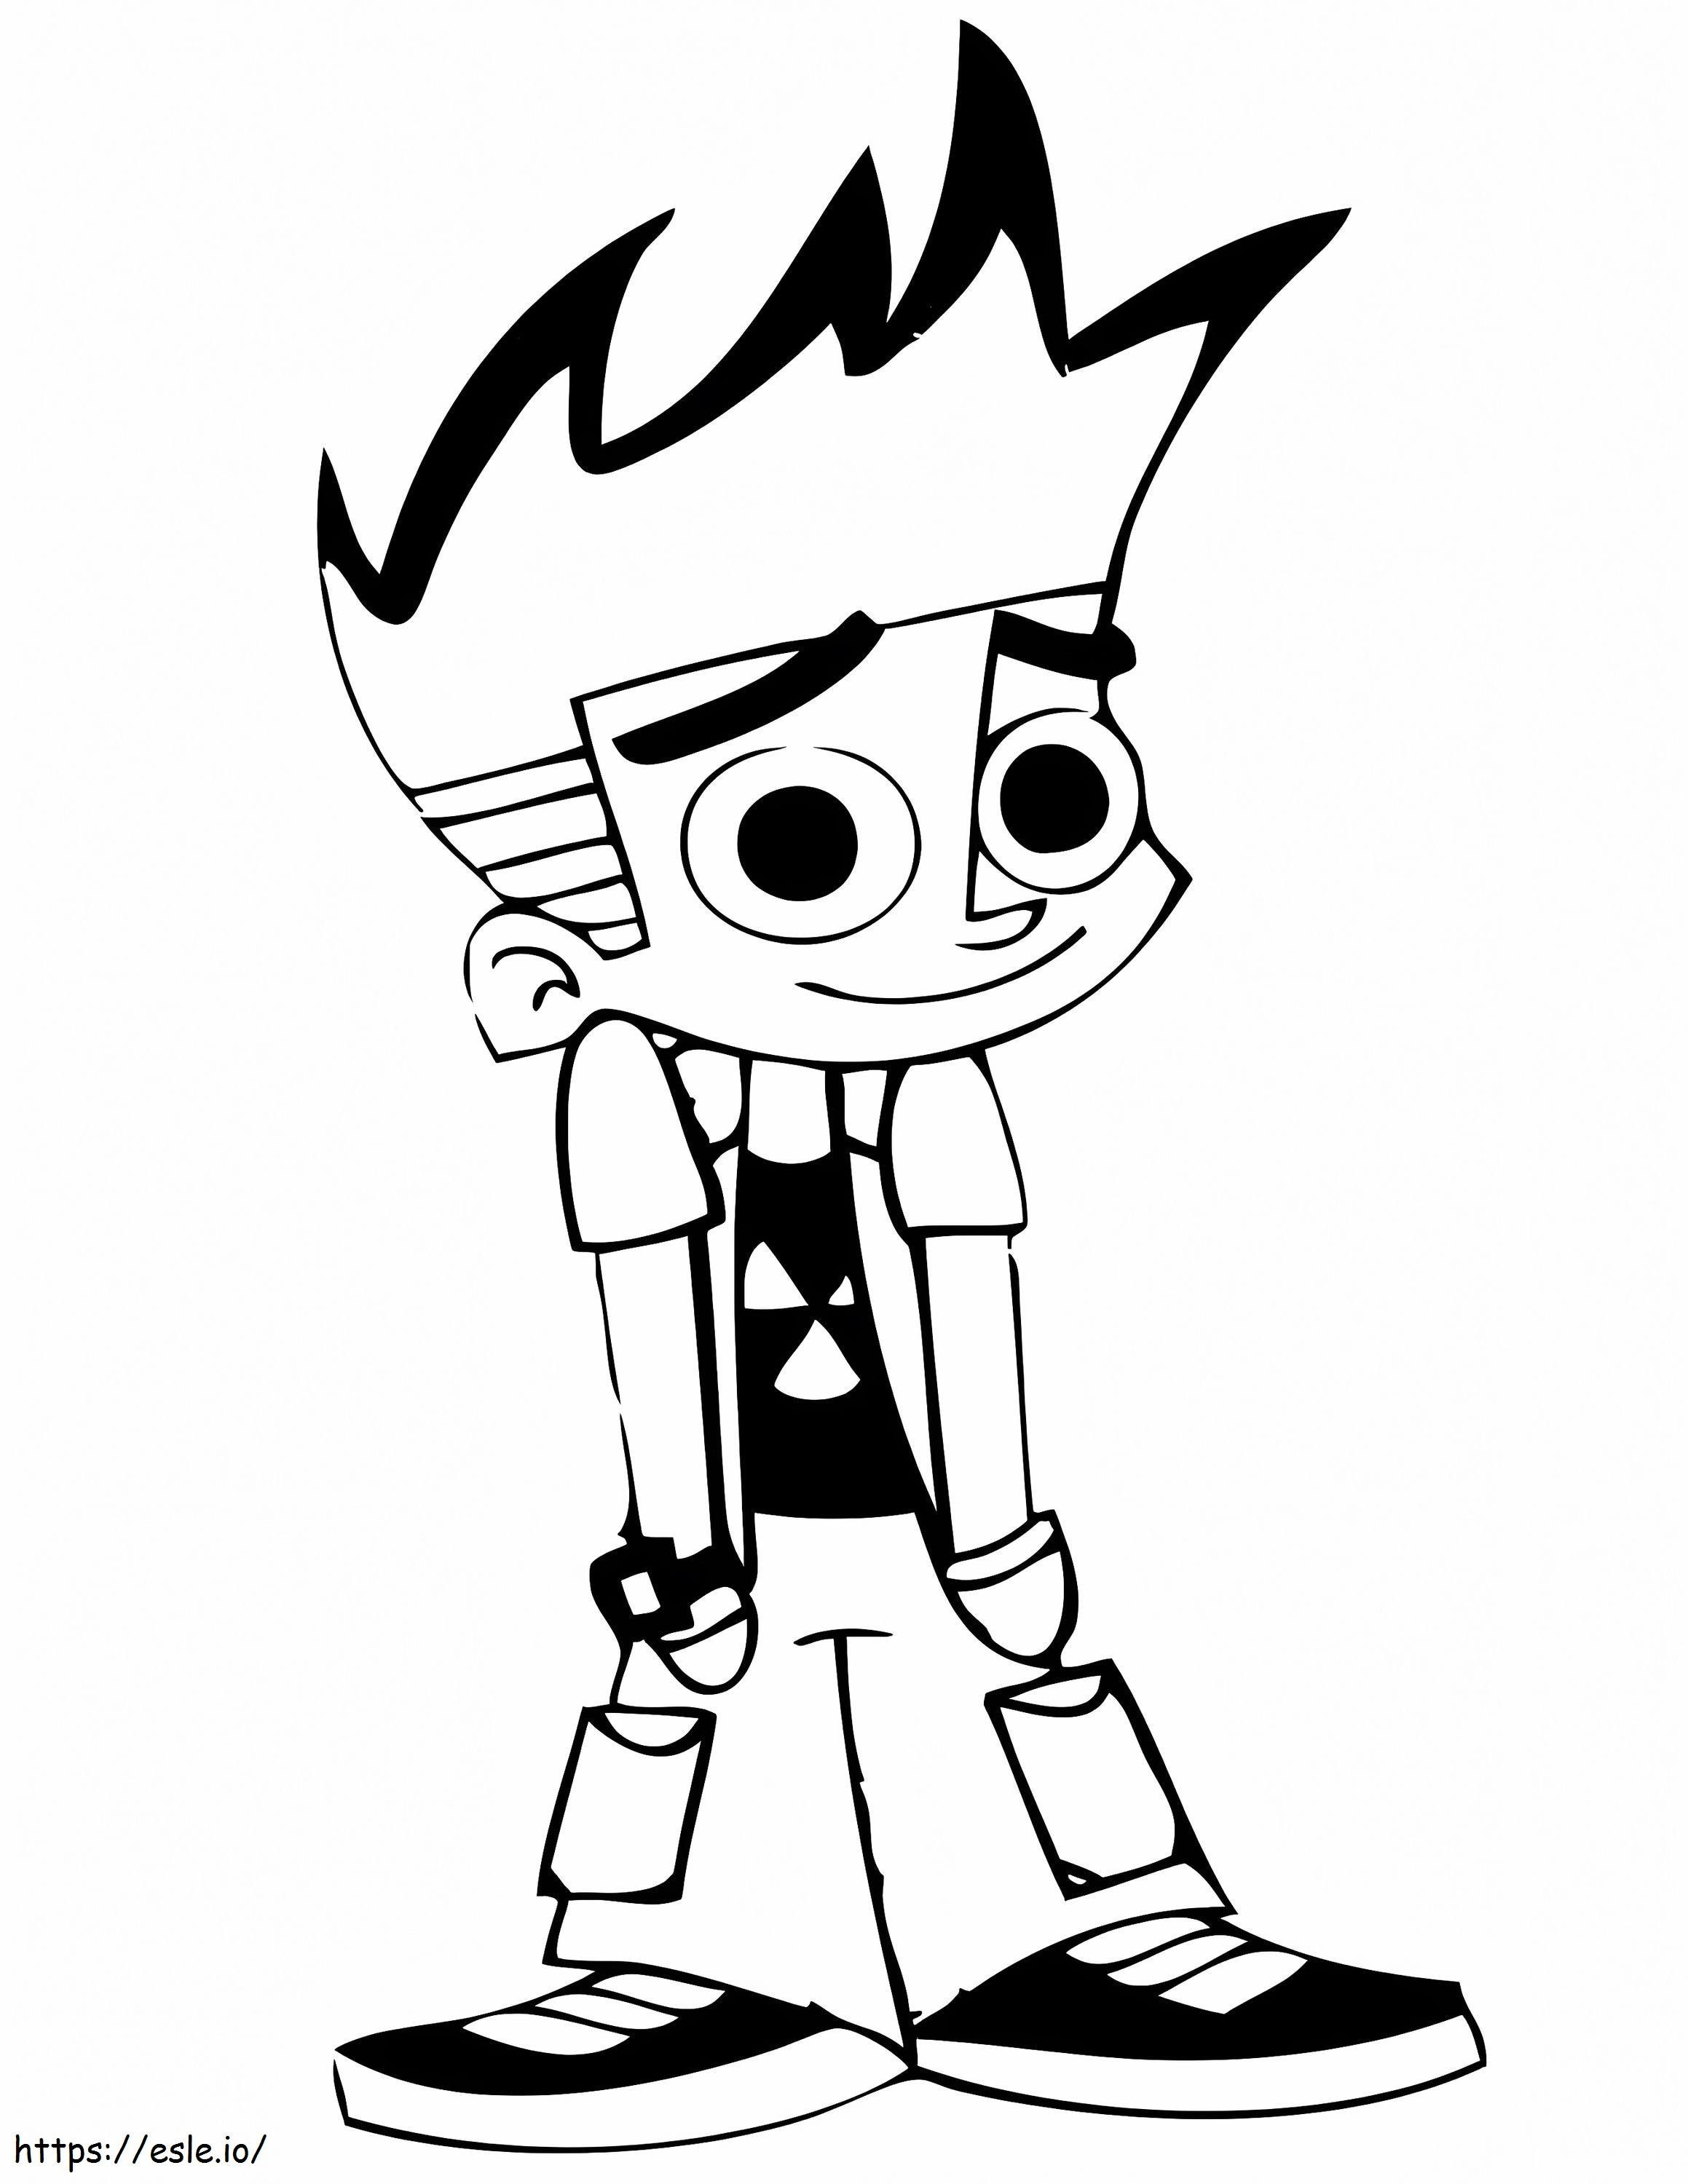 Funny Johnny Test coloring page